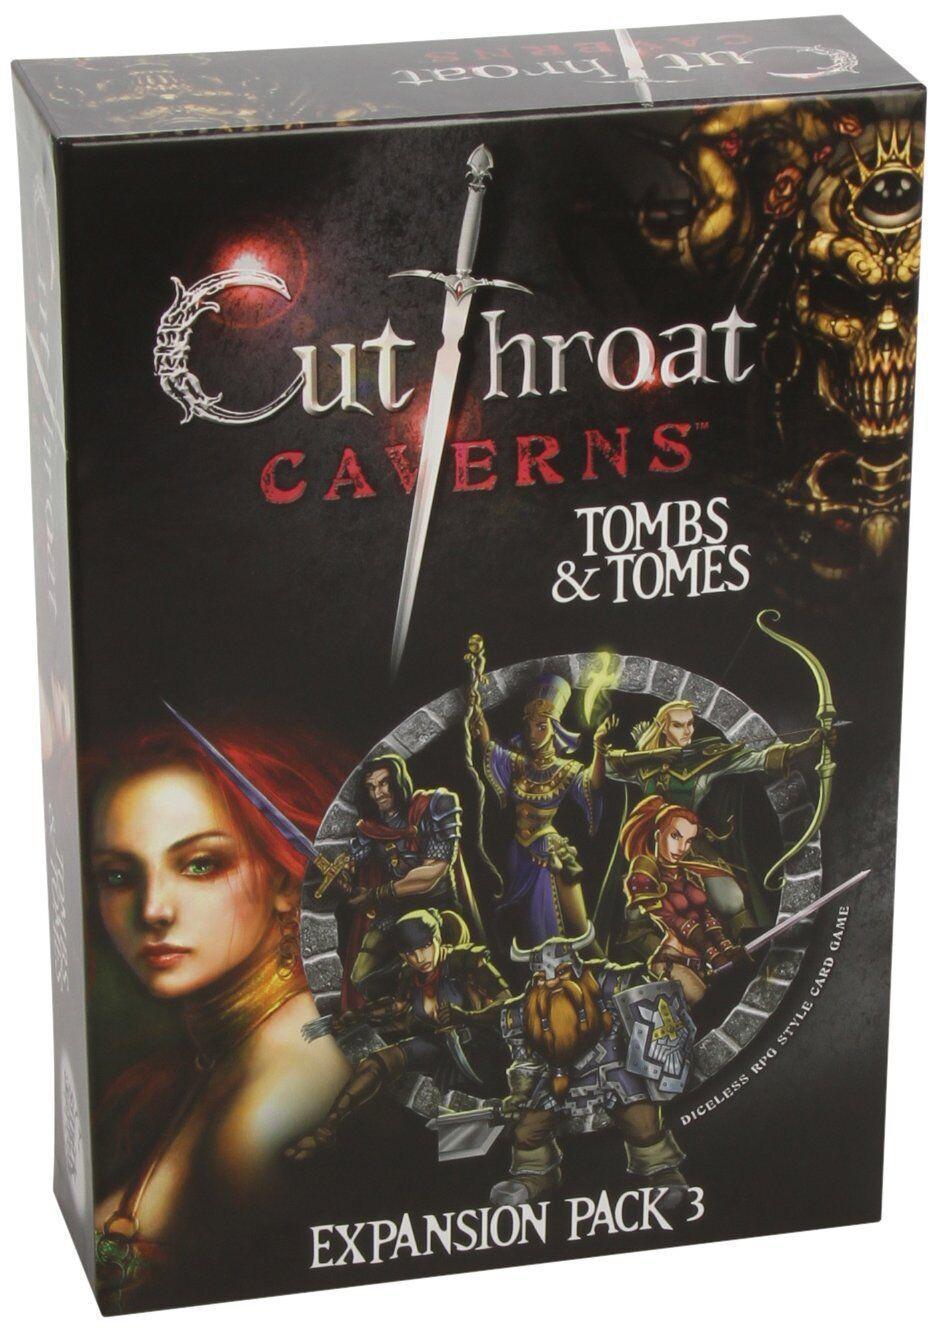 Cutthroat Caverns - Tombs and Tomes Expansion Pack 3